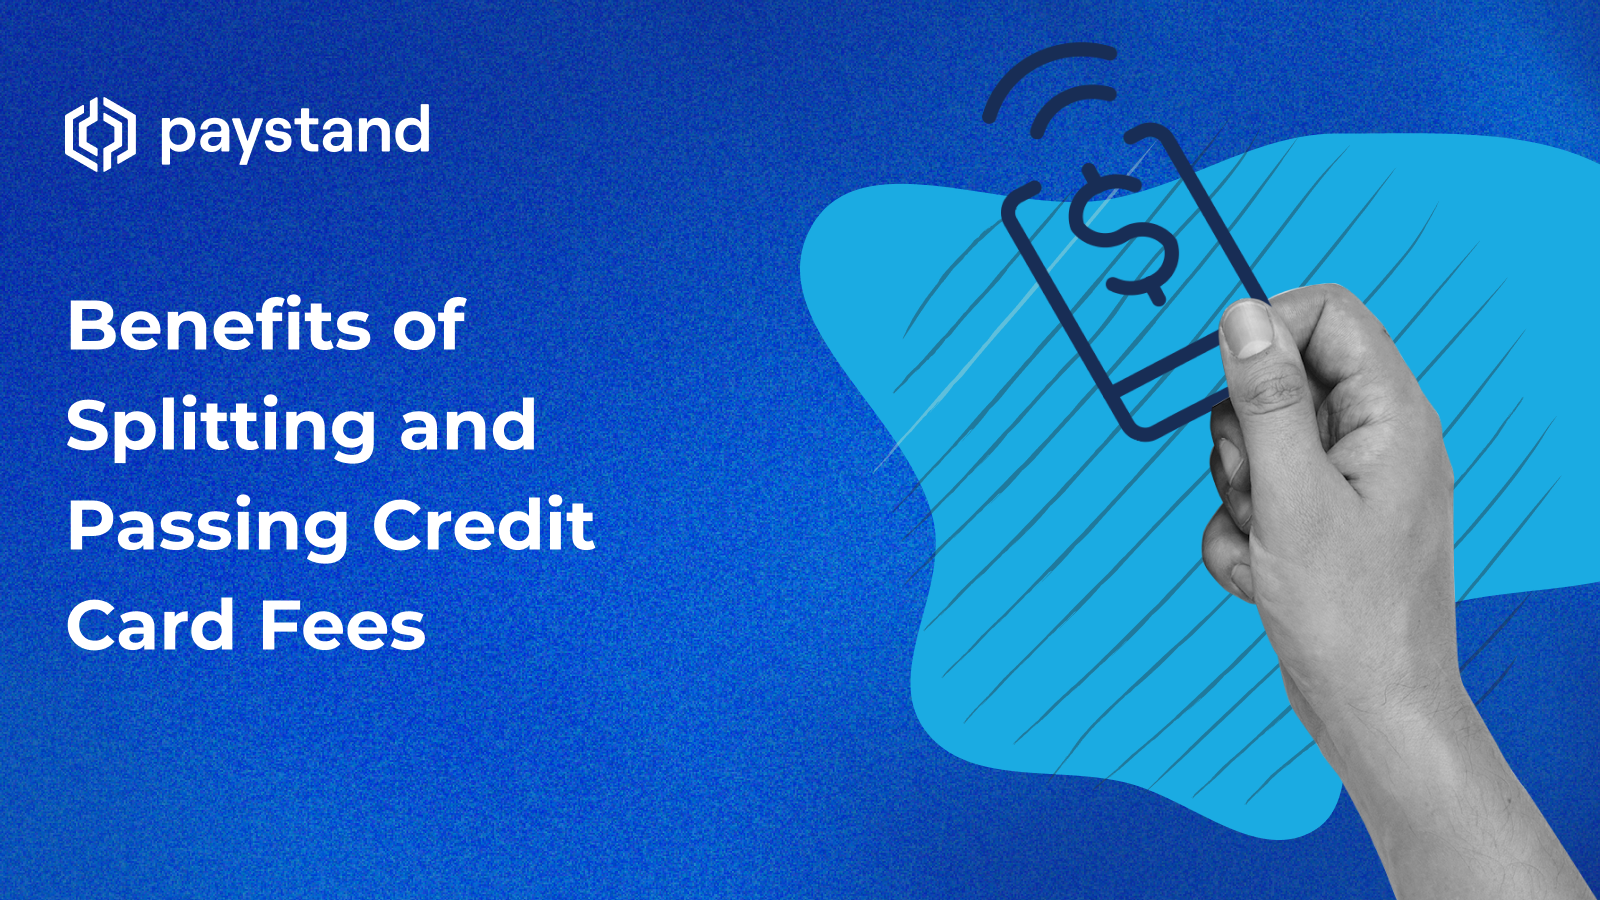 Benefits of Splitting and Passing Credit Card Fees